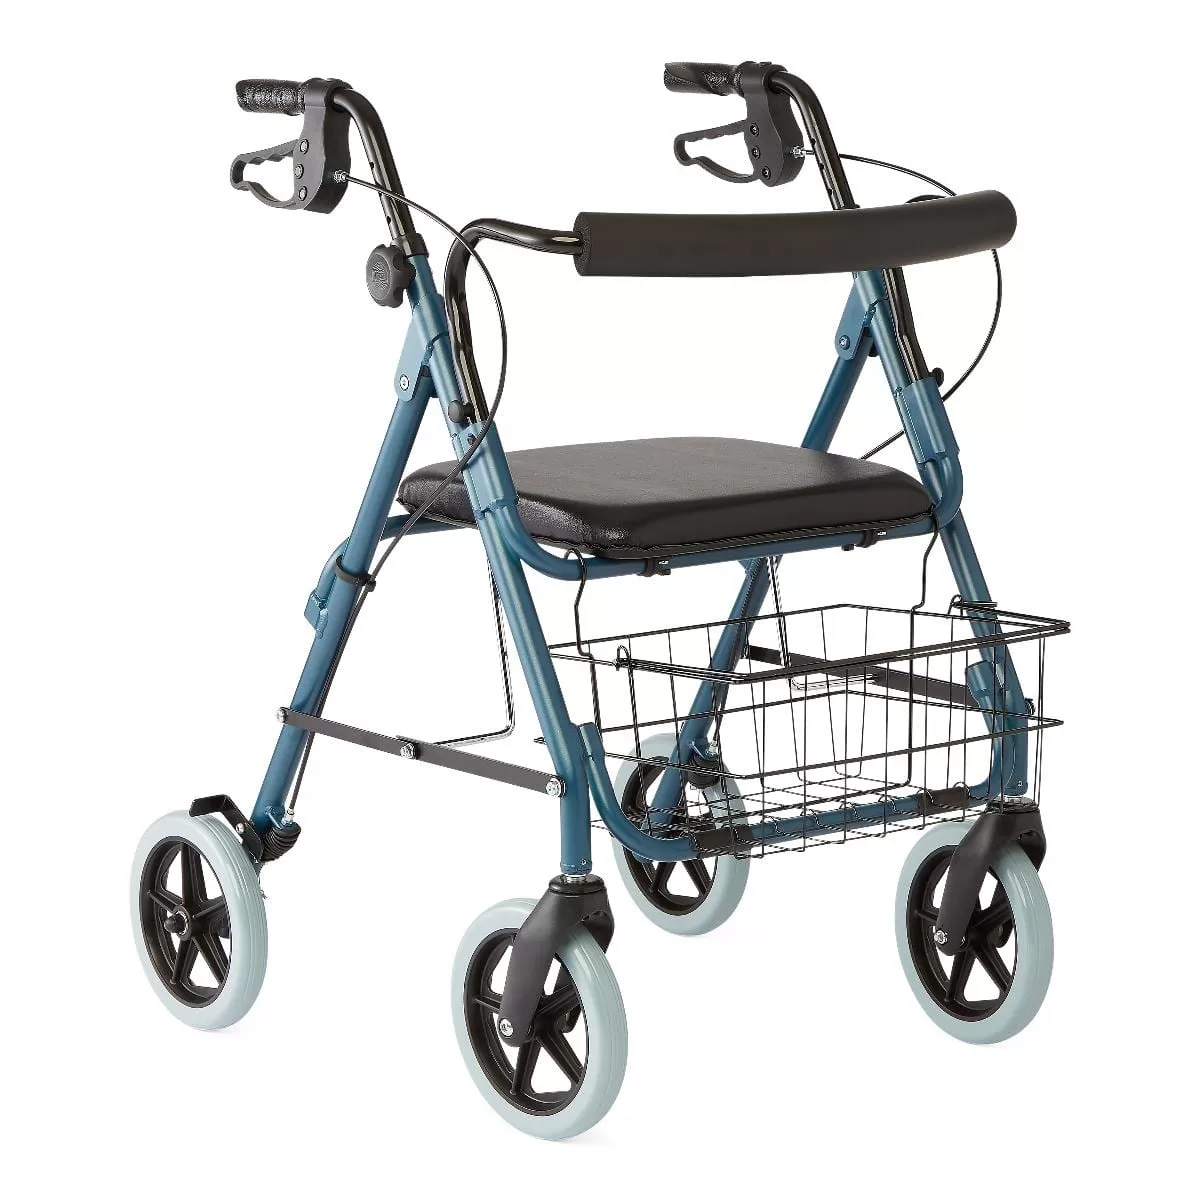 rollator holds 300 pounds